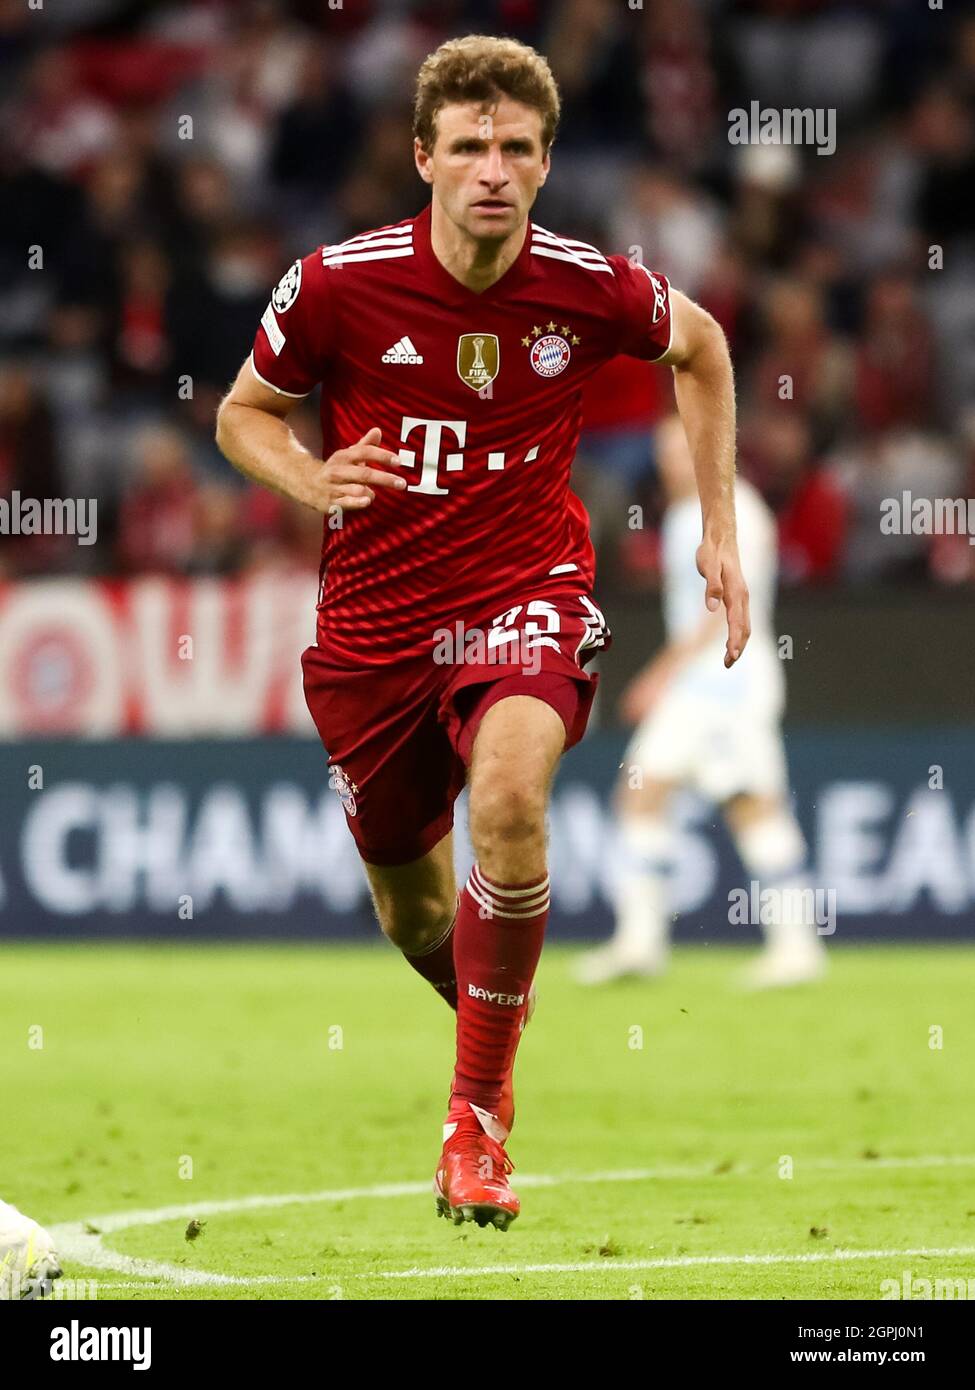 MUNICH, GERMANY - SEPTEMBER 29: Thomas Muller of FC Bayern Munchen during  the UEFA Champions League Group Stage match between Bayern Munchen and  Dinamo Kiev at the Allianz Arena on September 29,